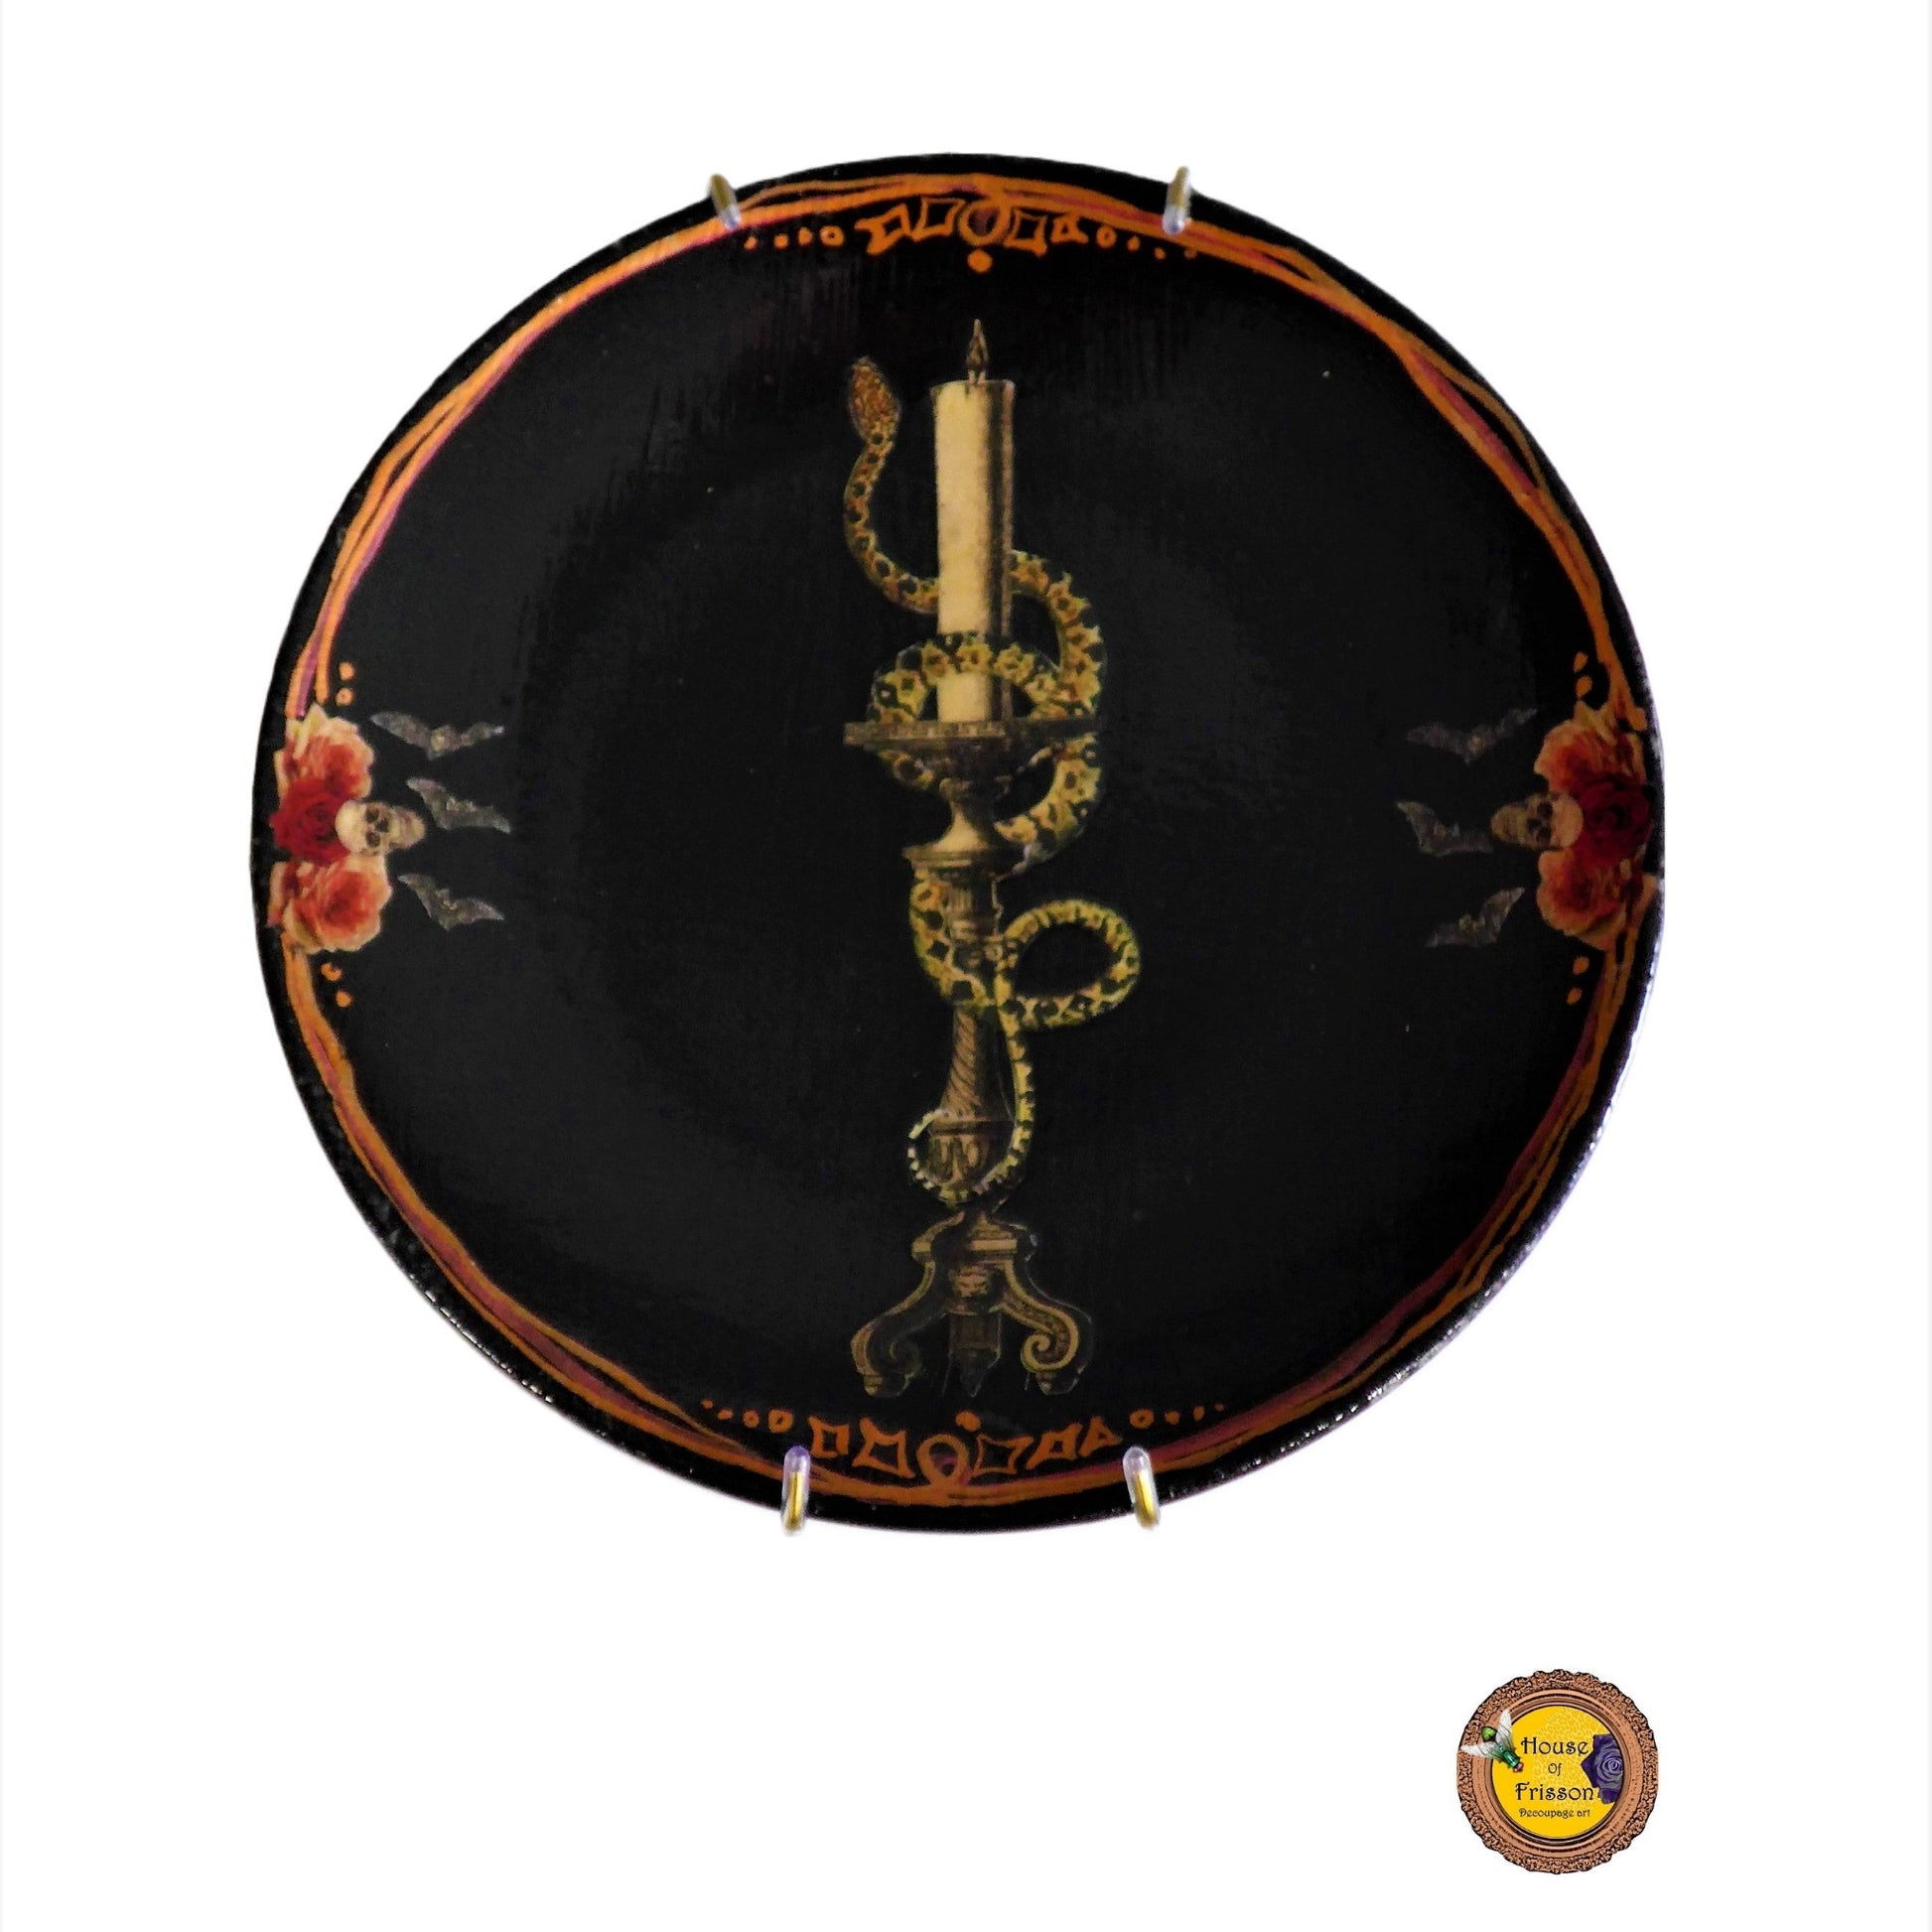 House of Frisson "Snake On Candlestick" Black Wall Plate front. Collage artwork featuring a snake wrapped around a candlestick, with skulls and bats details, on a black background.